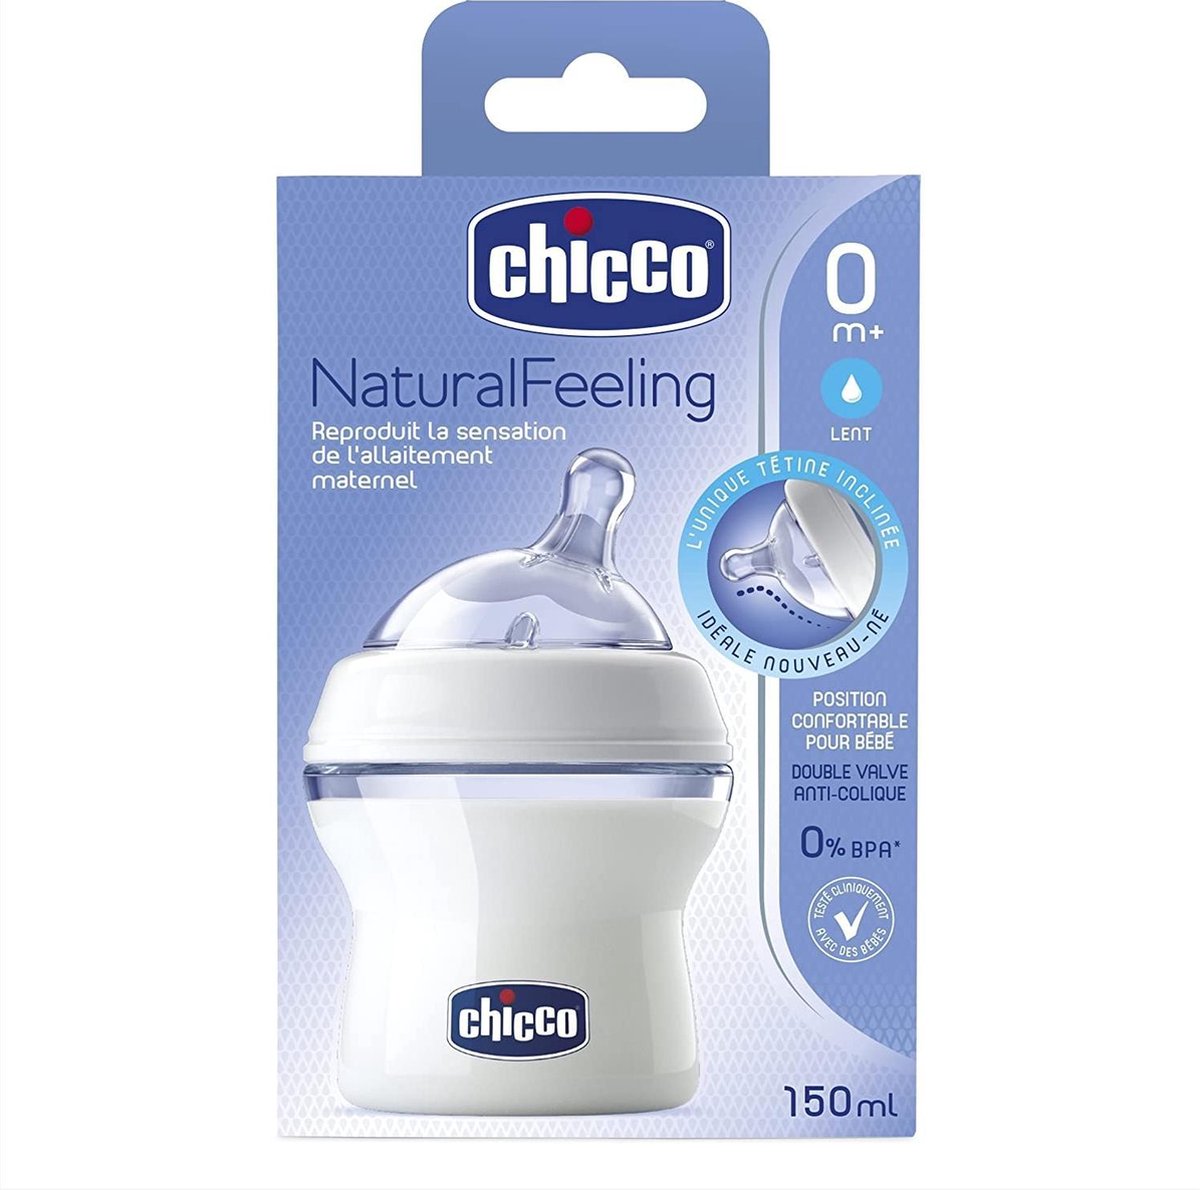 output ginder wol Chicco Zuigfles Natural Feeling 150 Ml Transparant | bol.com